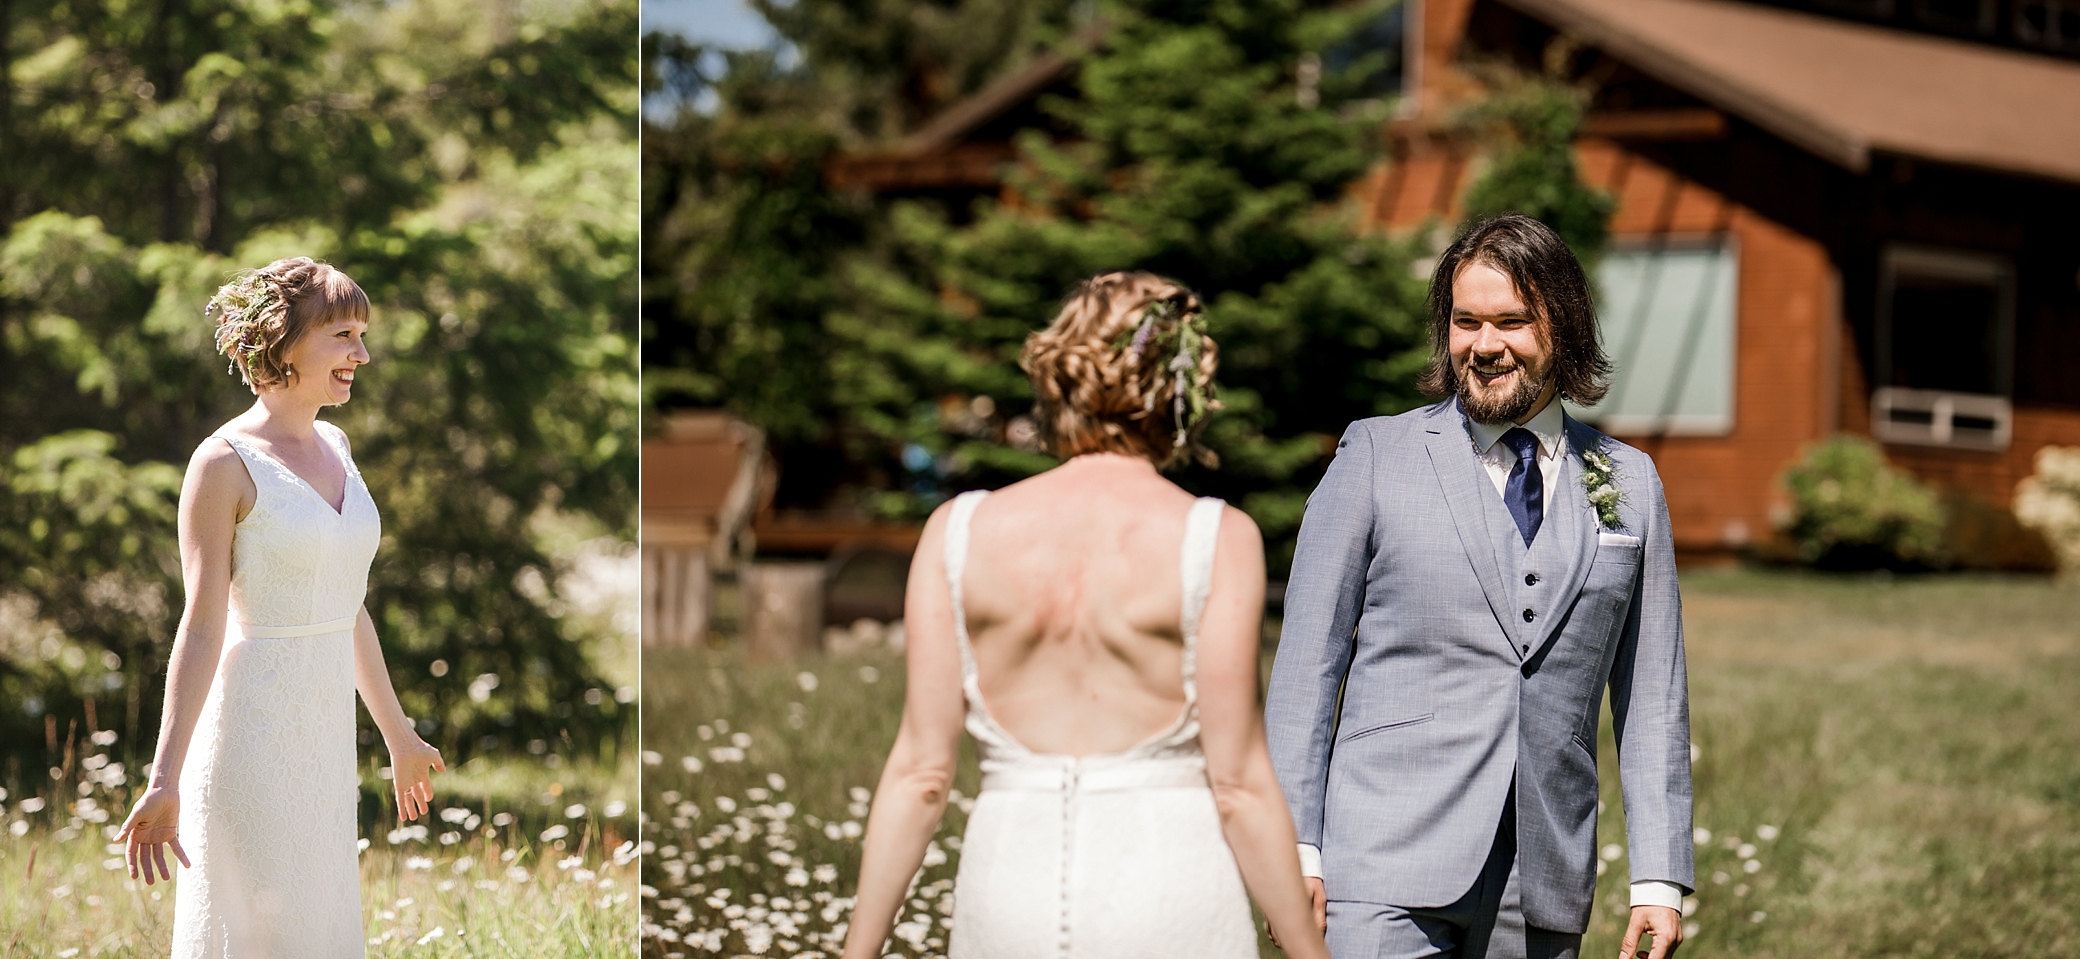 Groom sees Bride for the first time during first look before their intimate wedding ceremony at Olympic View Cabins | Megan Montalvo Photography 